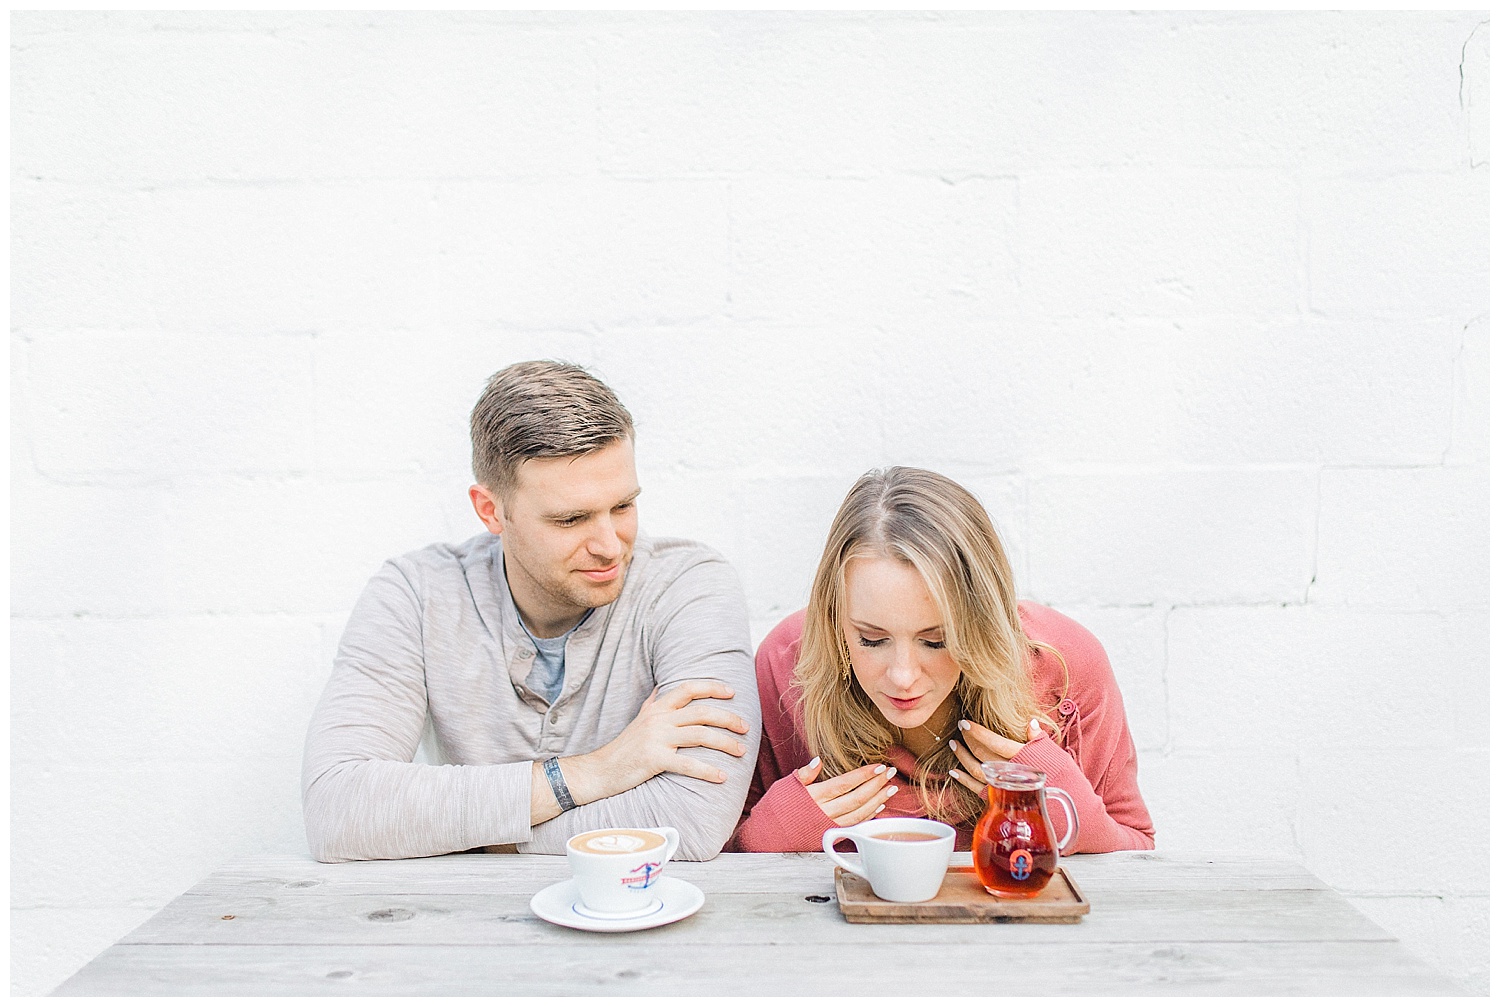 ERC_0860_Downtown Nashville Engagement Session at Barista Parlor | Emma Rose Company Wedding Photographer | Outfit Inspiration for Engagement Session | Kindred Light and Airy Photographer.jpg